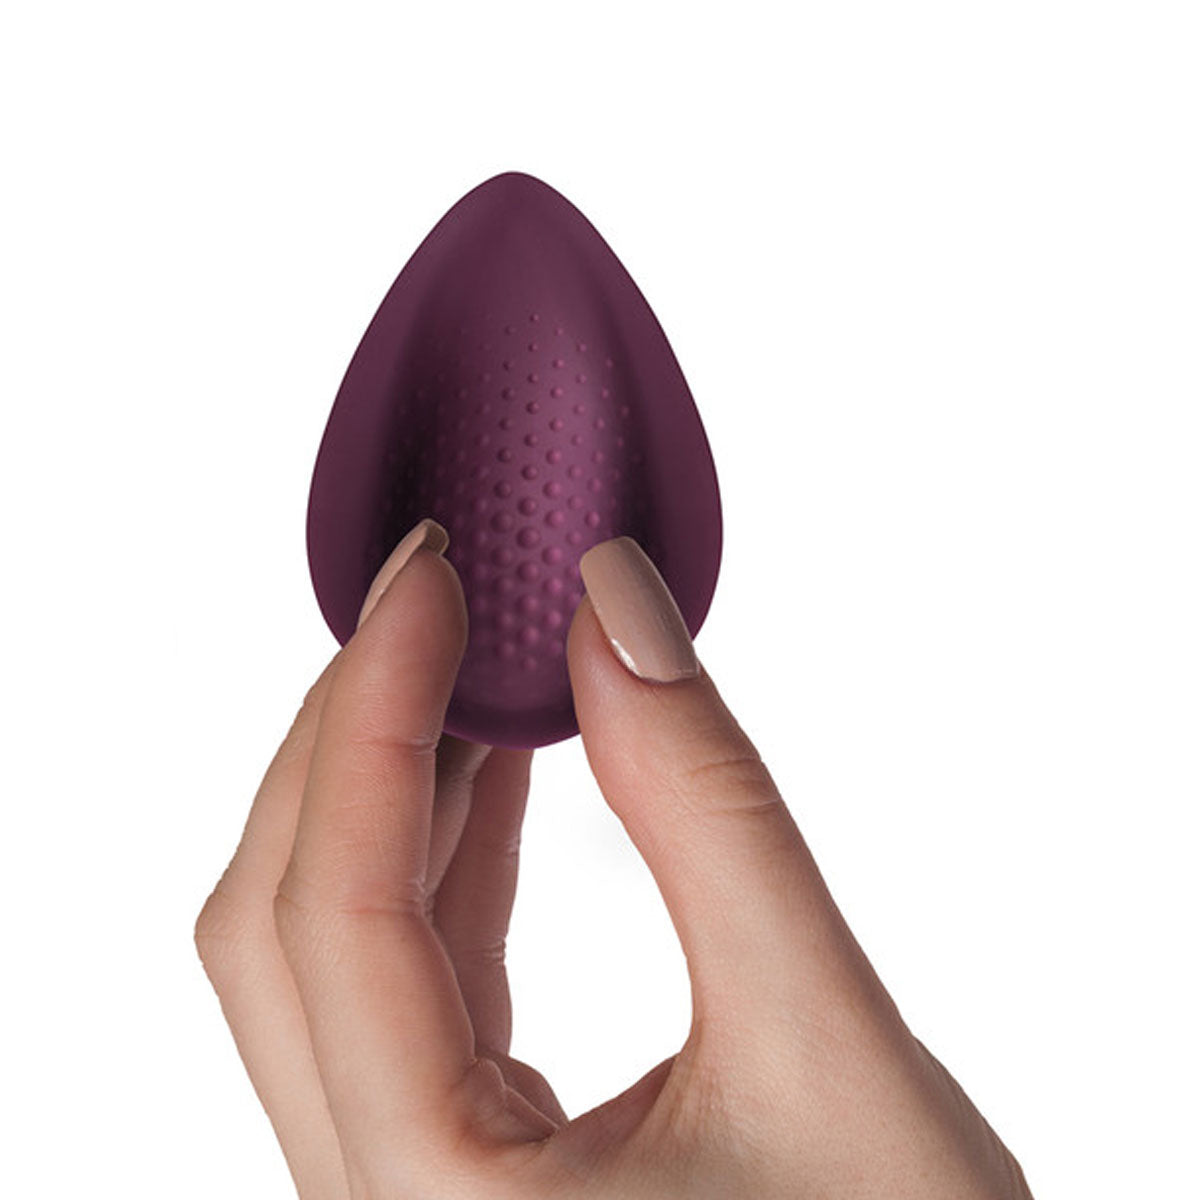 Hand holding small burgundy vibrator with bumpy texture Nudie Co